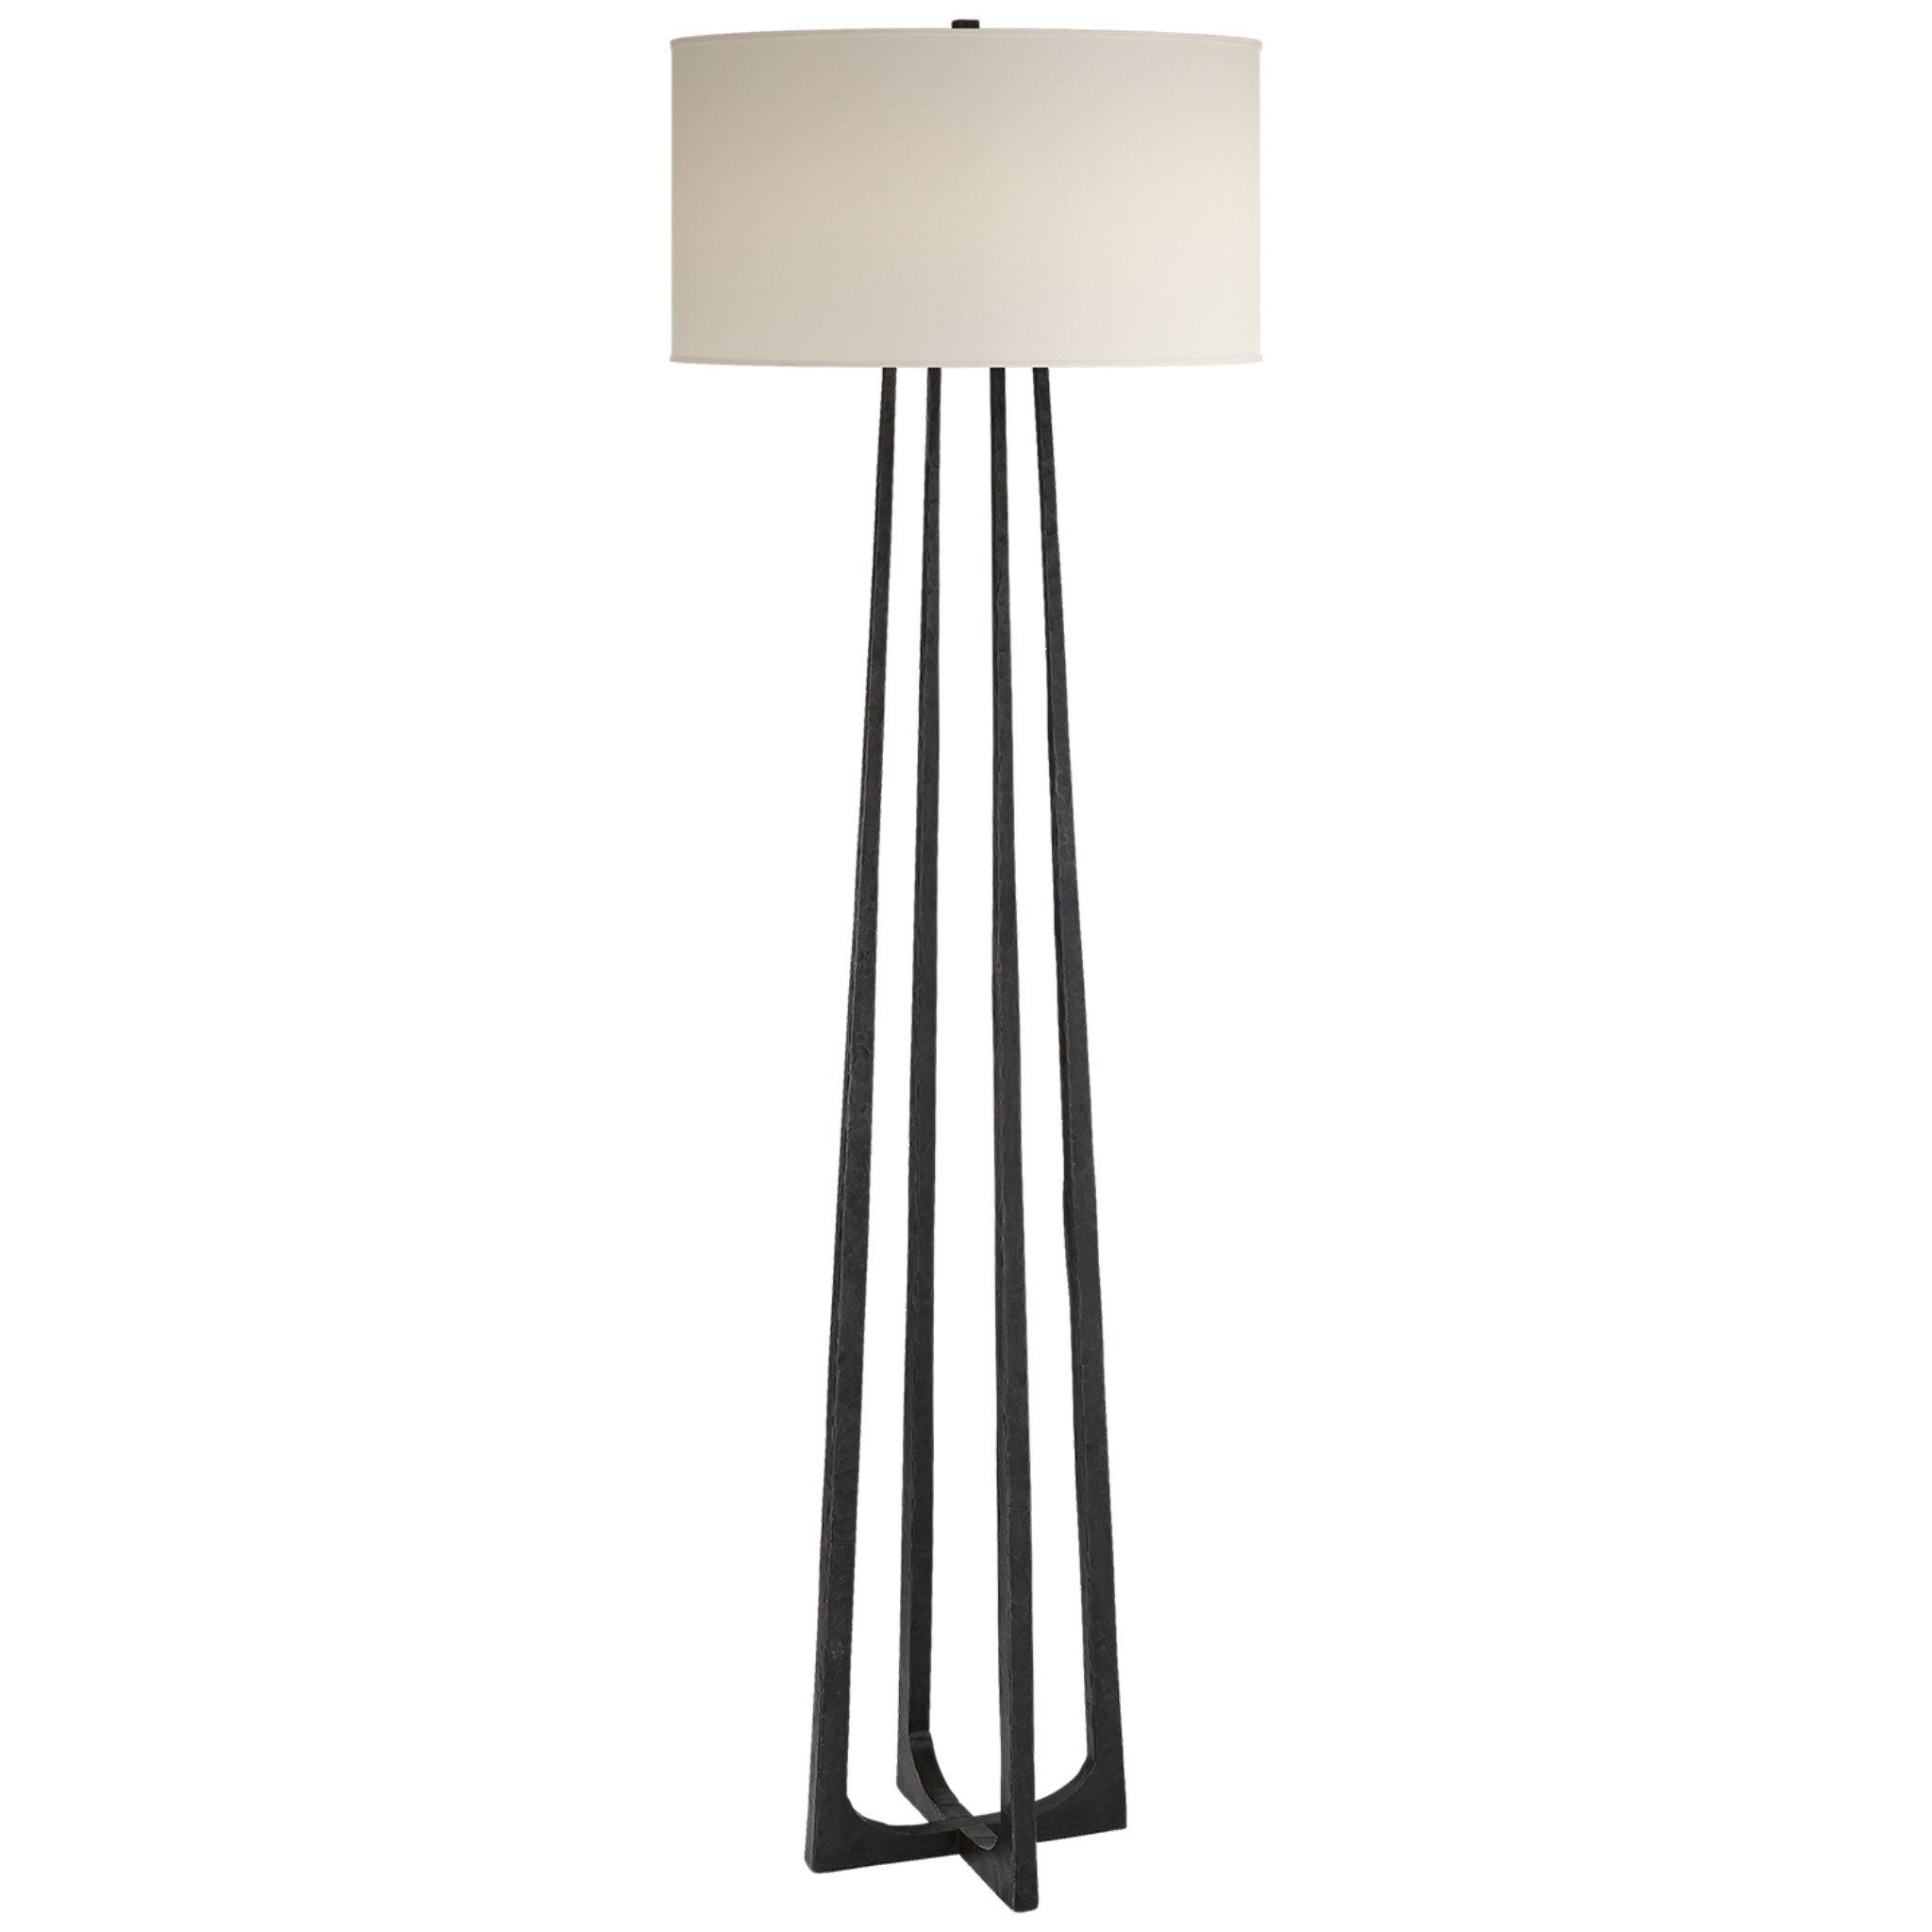 Ian K. Fowler Scala Large Hand-Forged Floor Lamp in Aged Iron with Natural Percale Shade